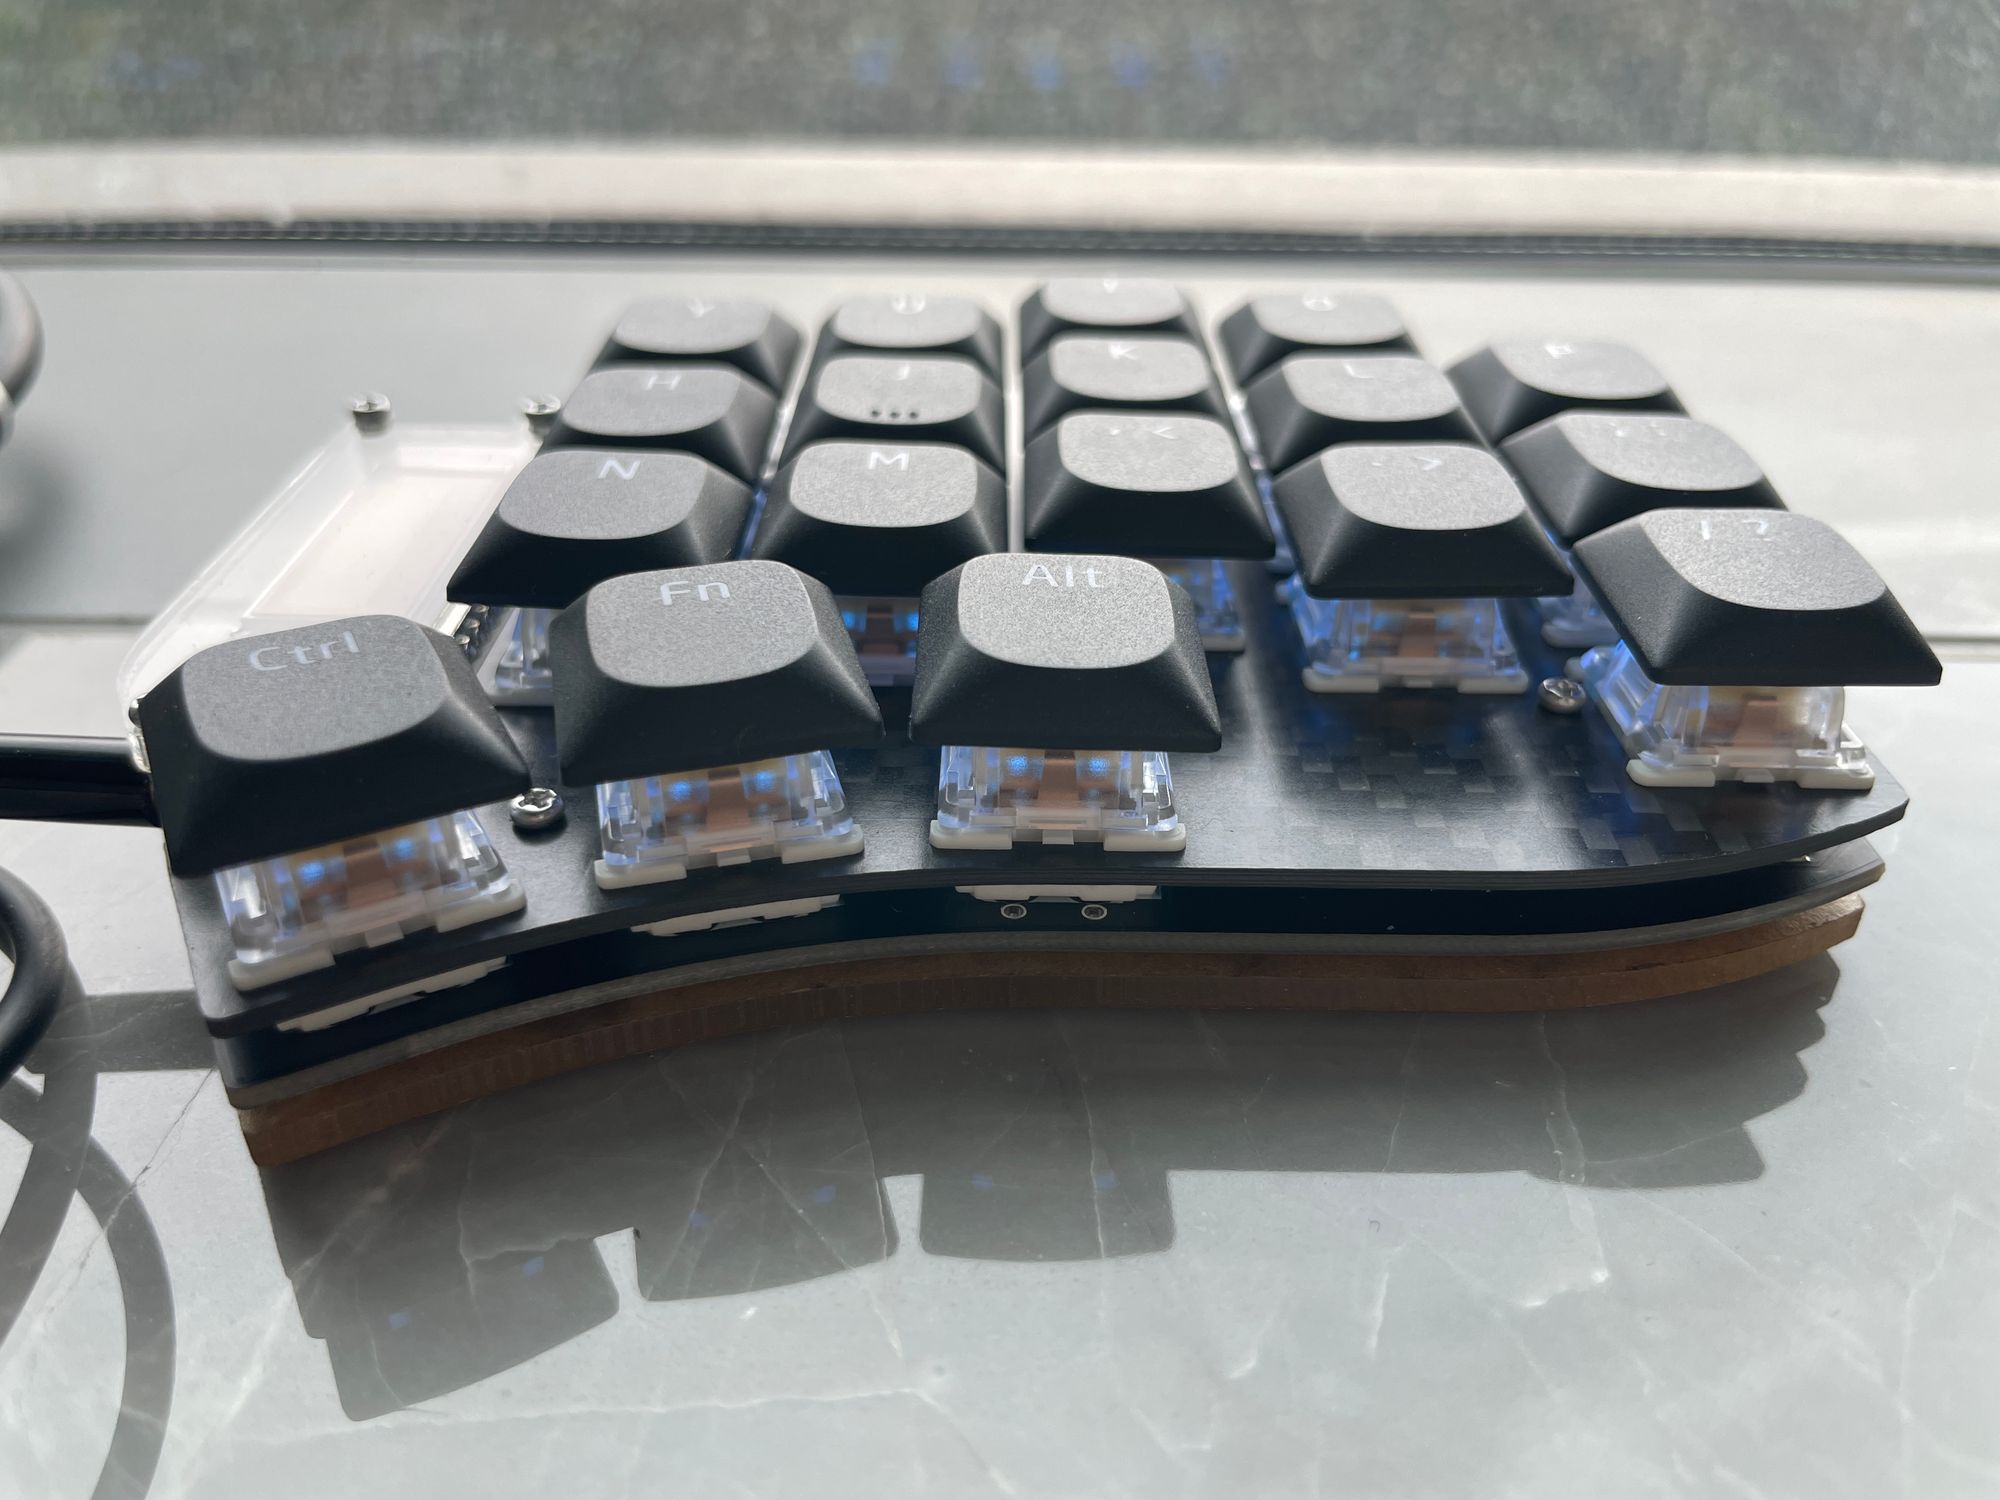 36 Keys Swoop Keyboard with Per-Key RGB LEDs and OLED Display